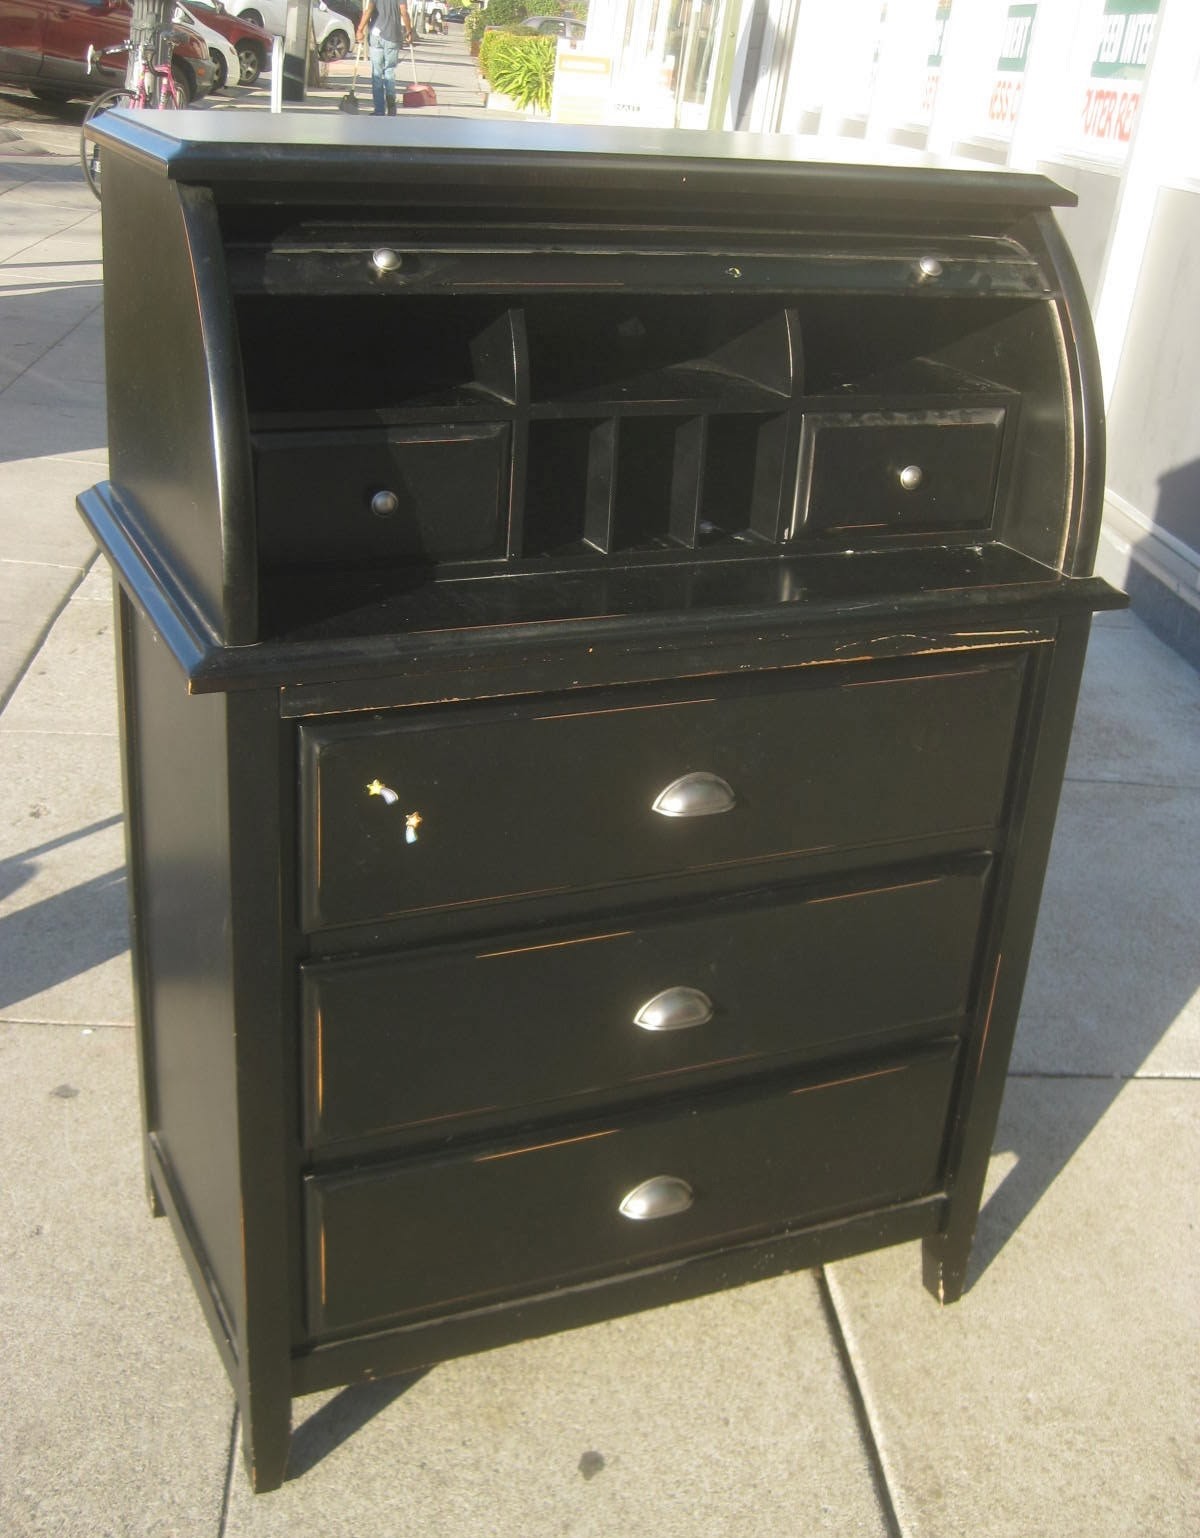 Uhuru furniture collectibles sold small black rolltop